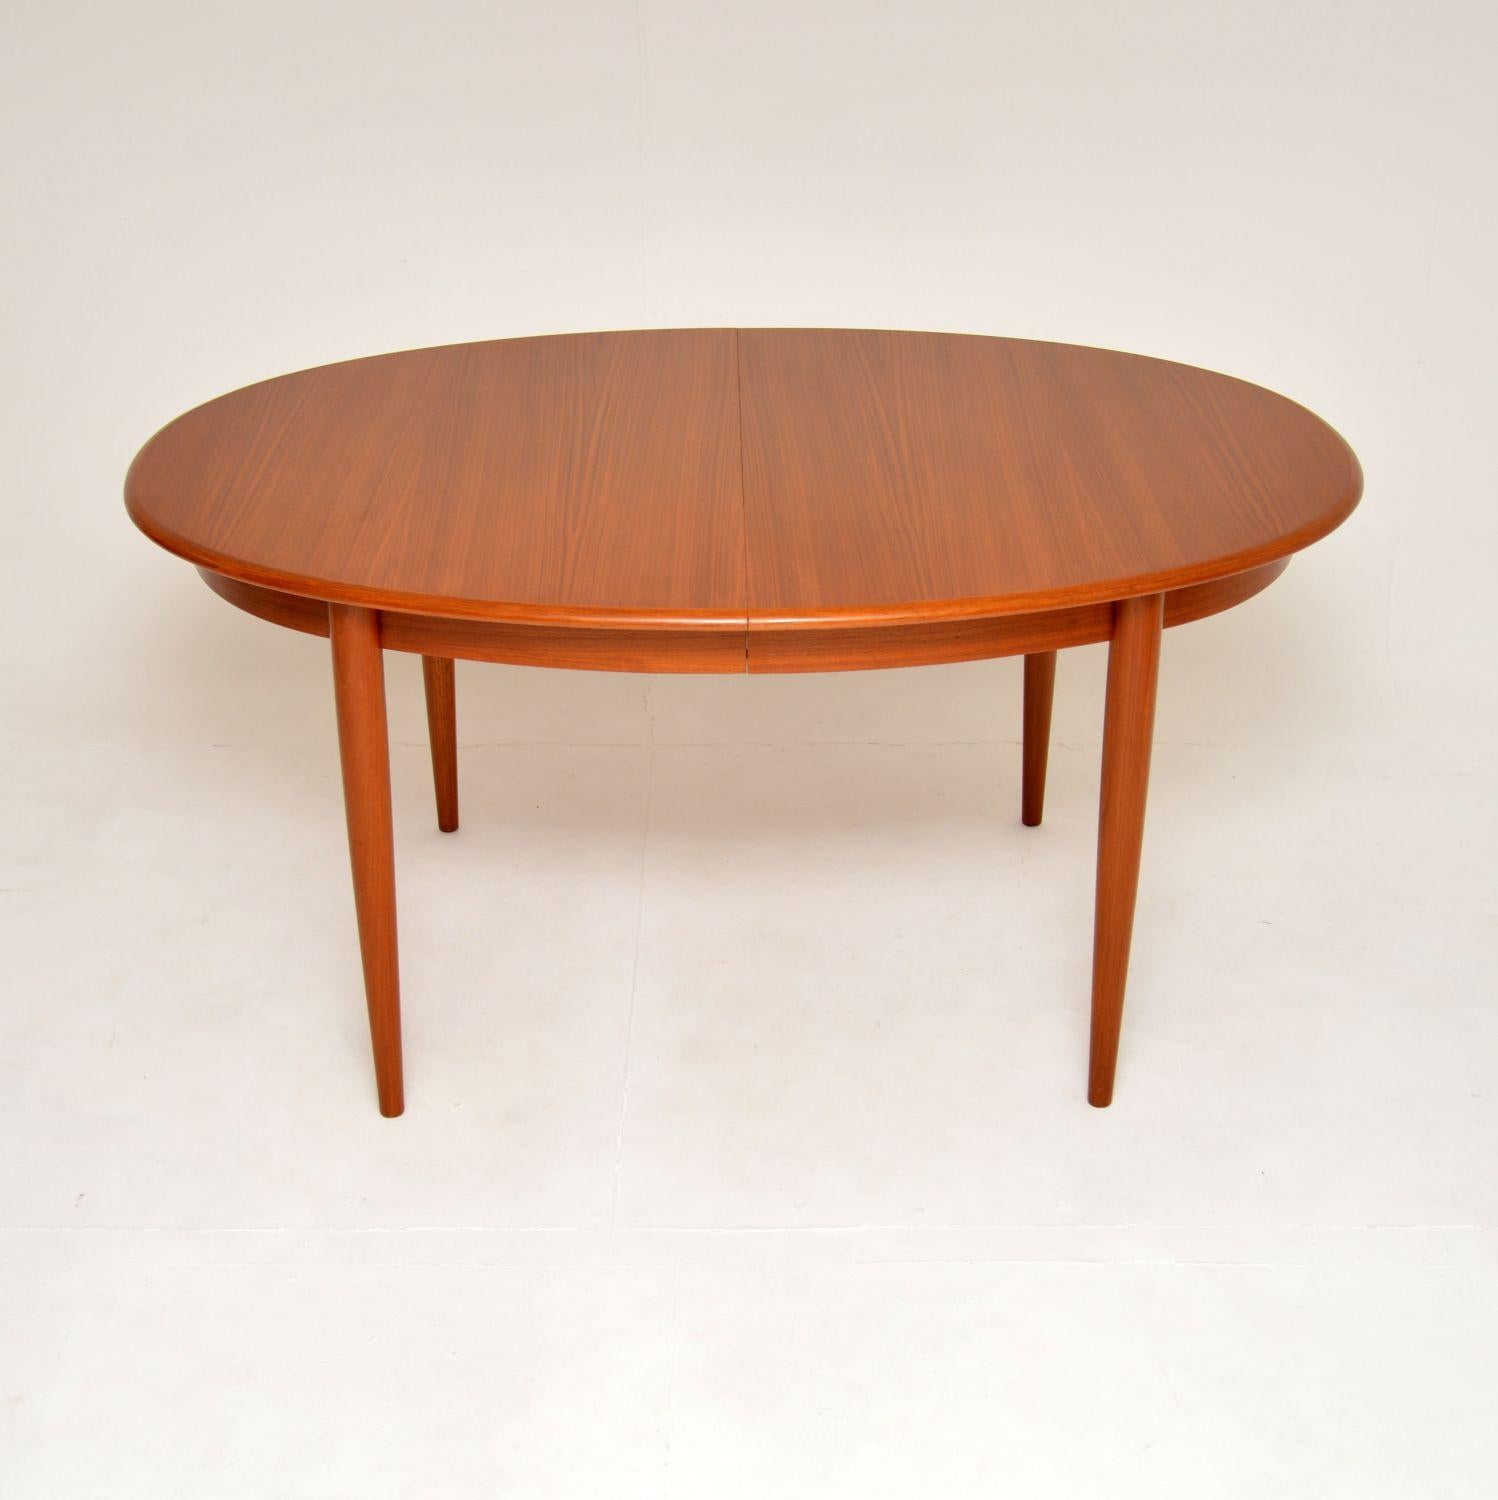 A stylish and extremely well made vintage Danish teak extending dining table. This was made in Denmark, it dates from the 1960’s.

It is a great size, with a sleek oval top sitting on beautifully tapered legs. There are two extension leaves that